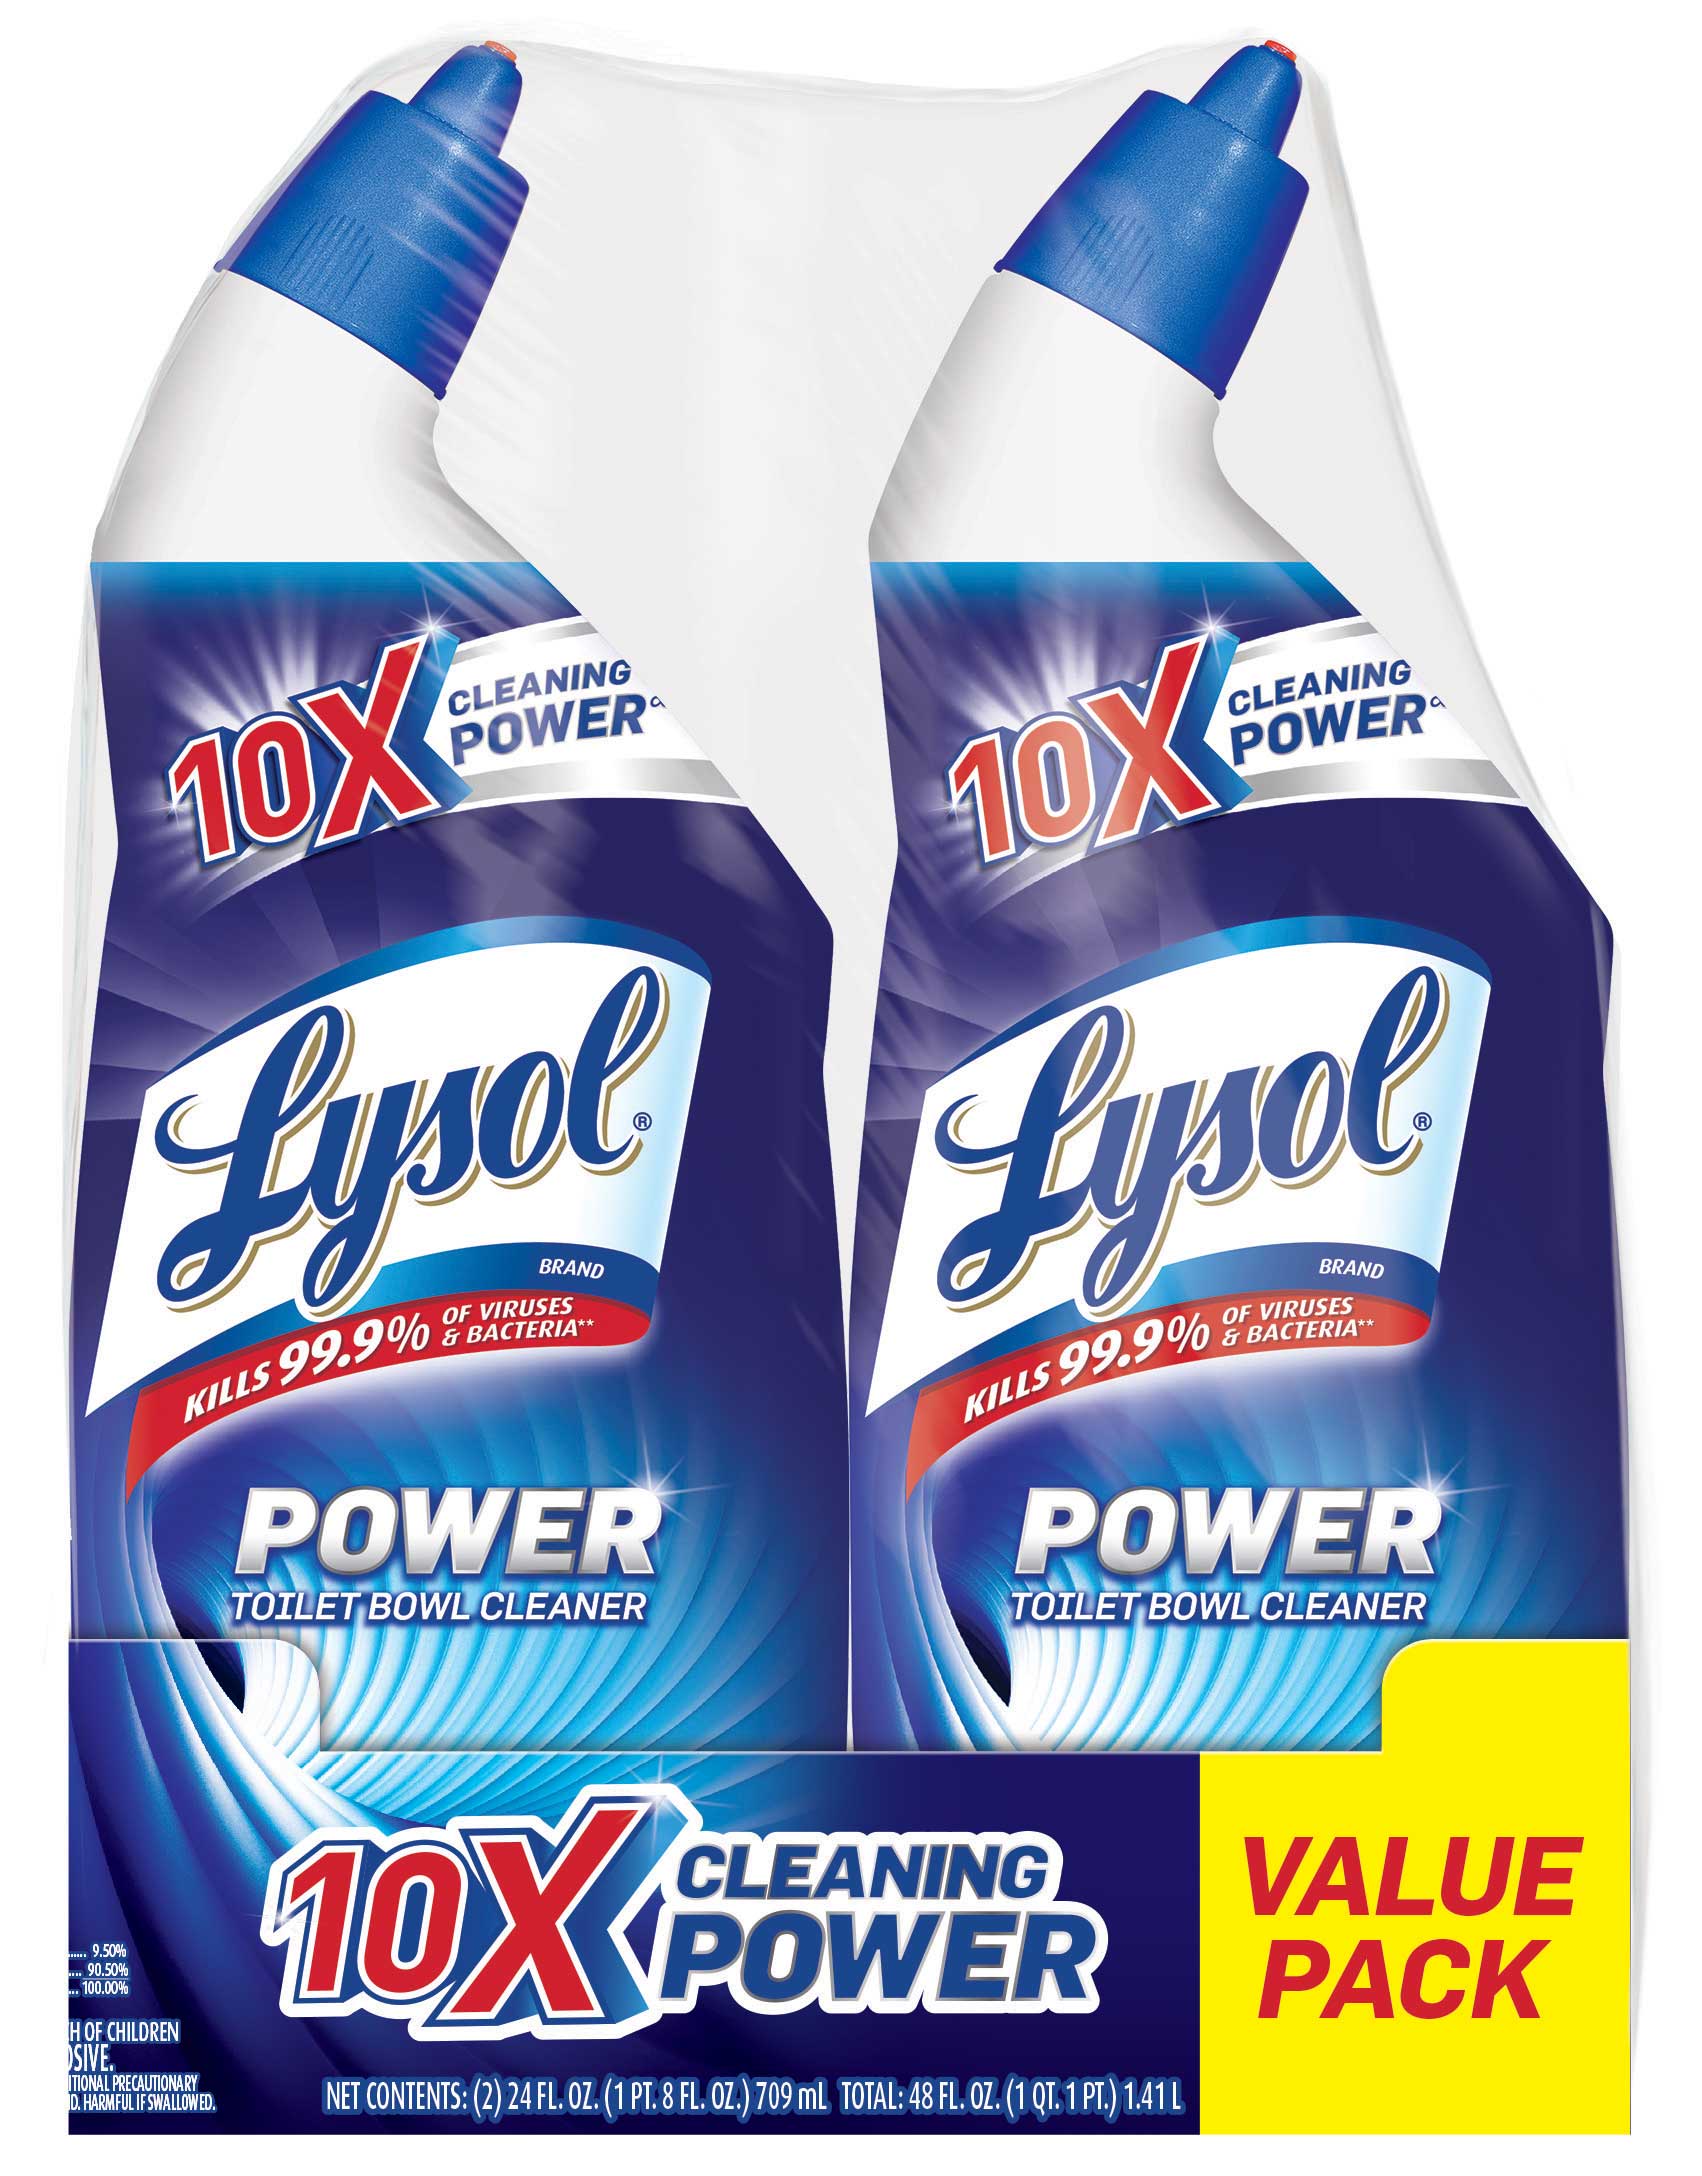 Lysol Power Toilet Bowl Cleaner Gel, For Cleaning and Disinfecting, Stain Removal, 24oz (Pack of 2) - image 1 of 6